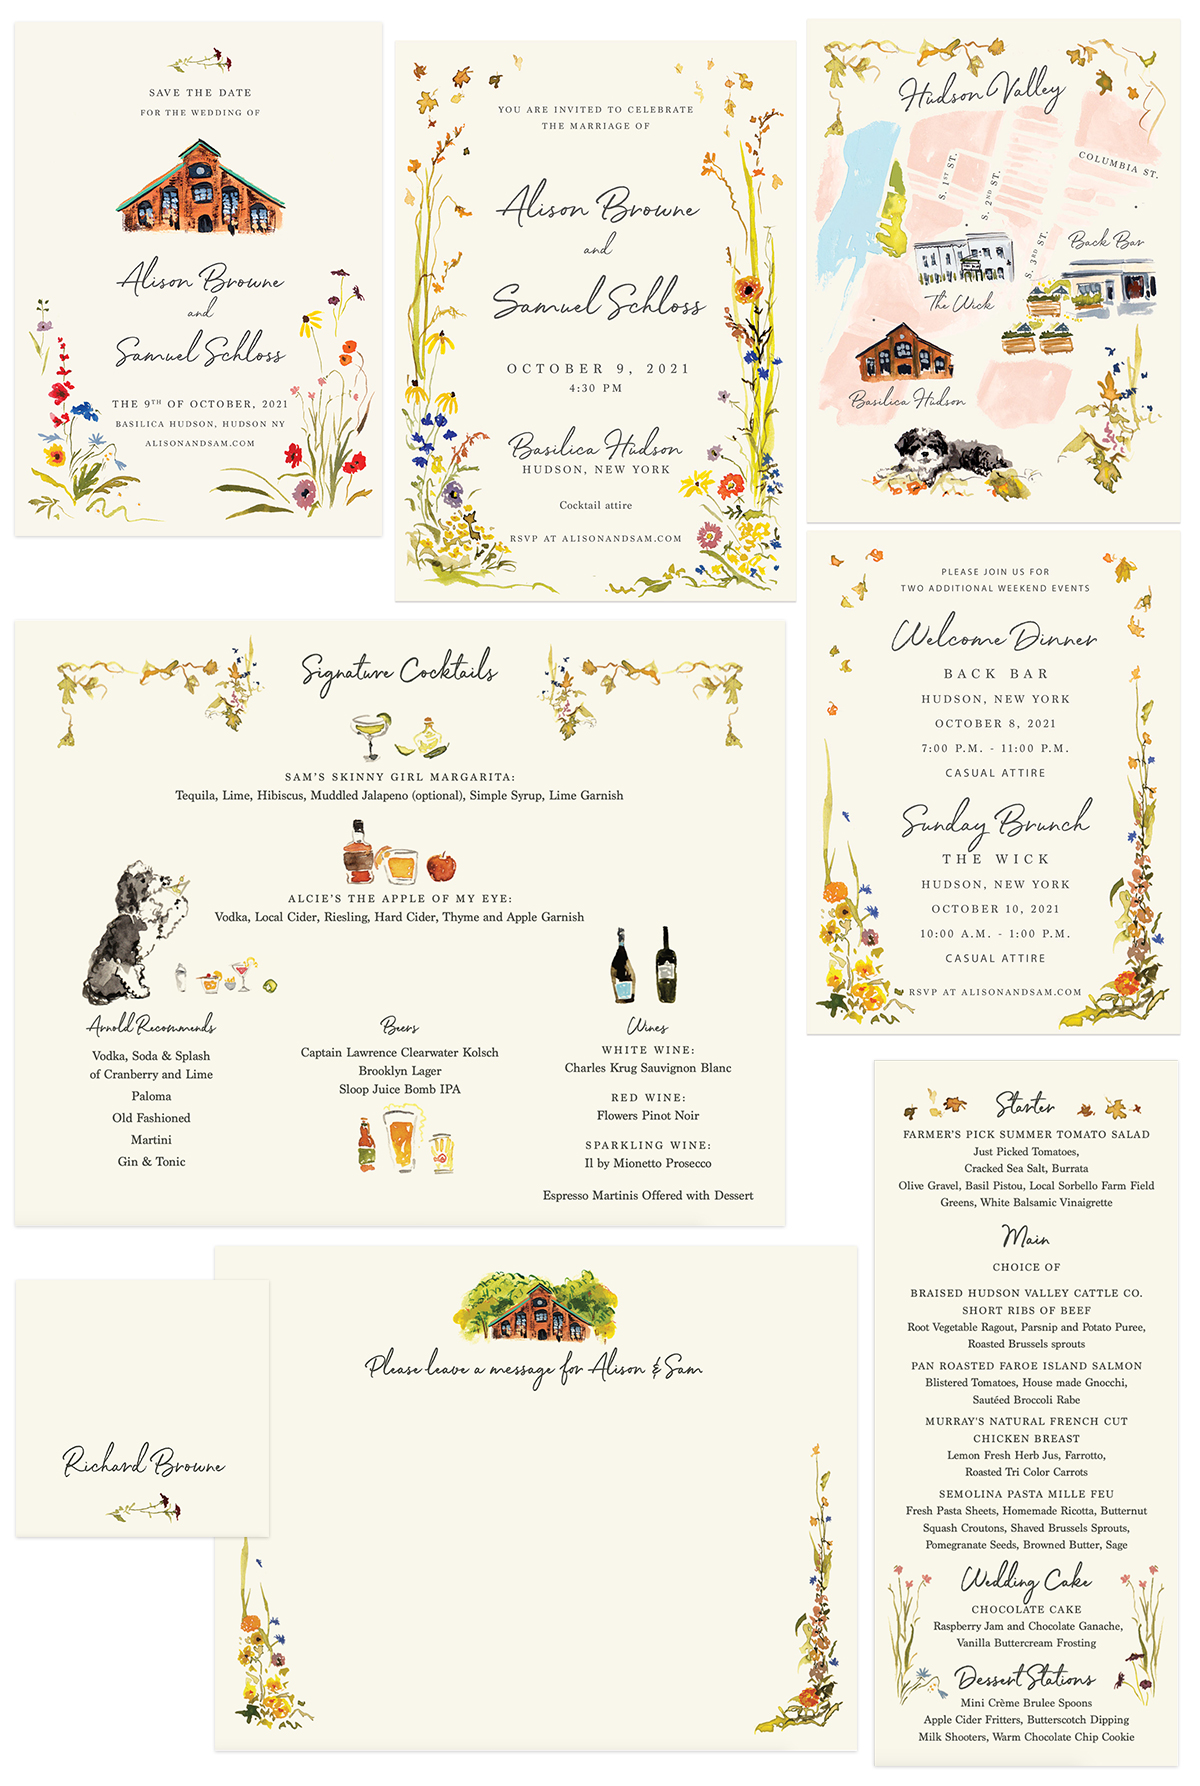 jolly edition Hudson valley wedding full stationery project layout